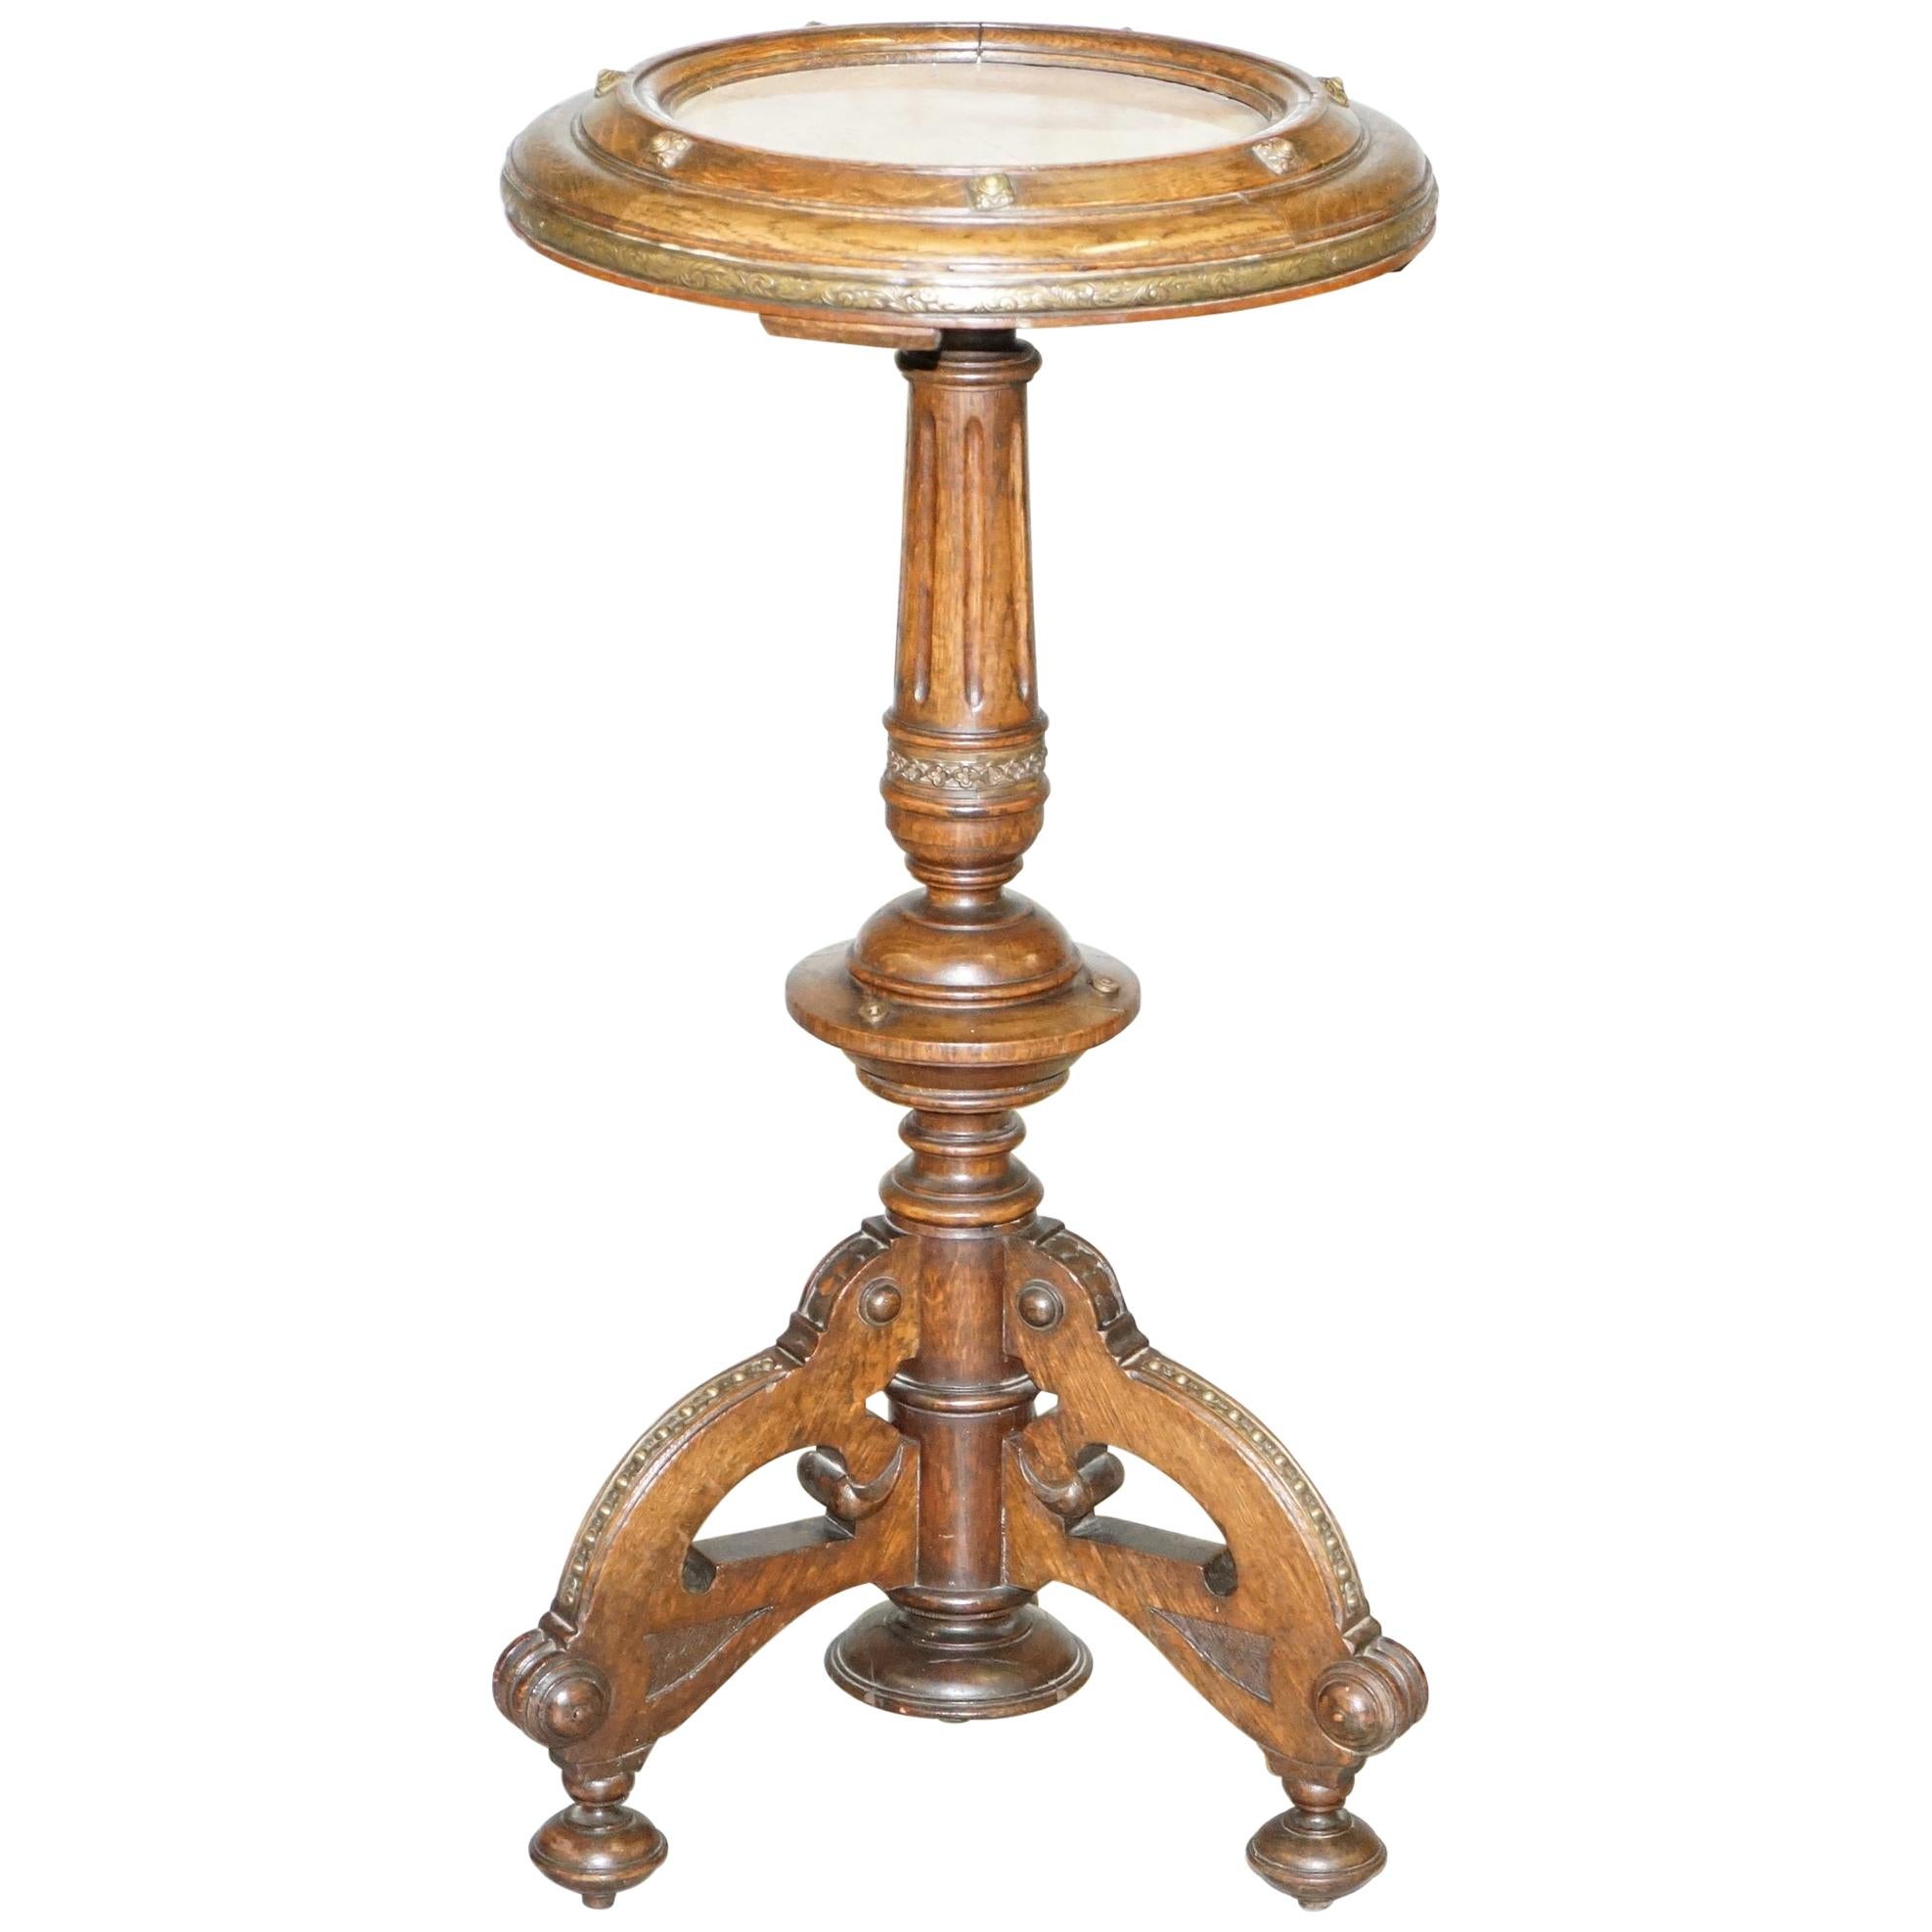 Very Rare Gothic Revival English Oak Marble & Bronze Side Table Stunning Patina